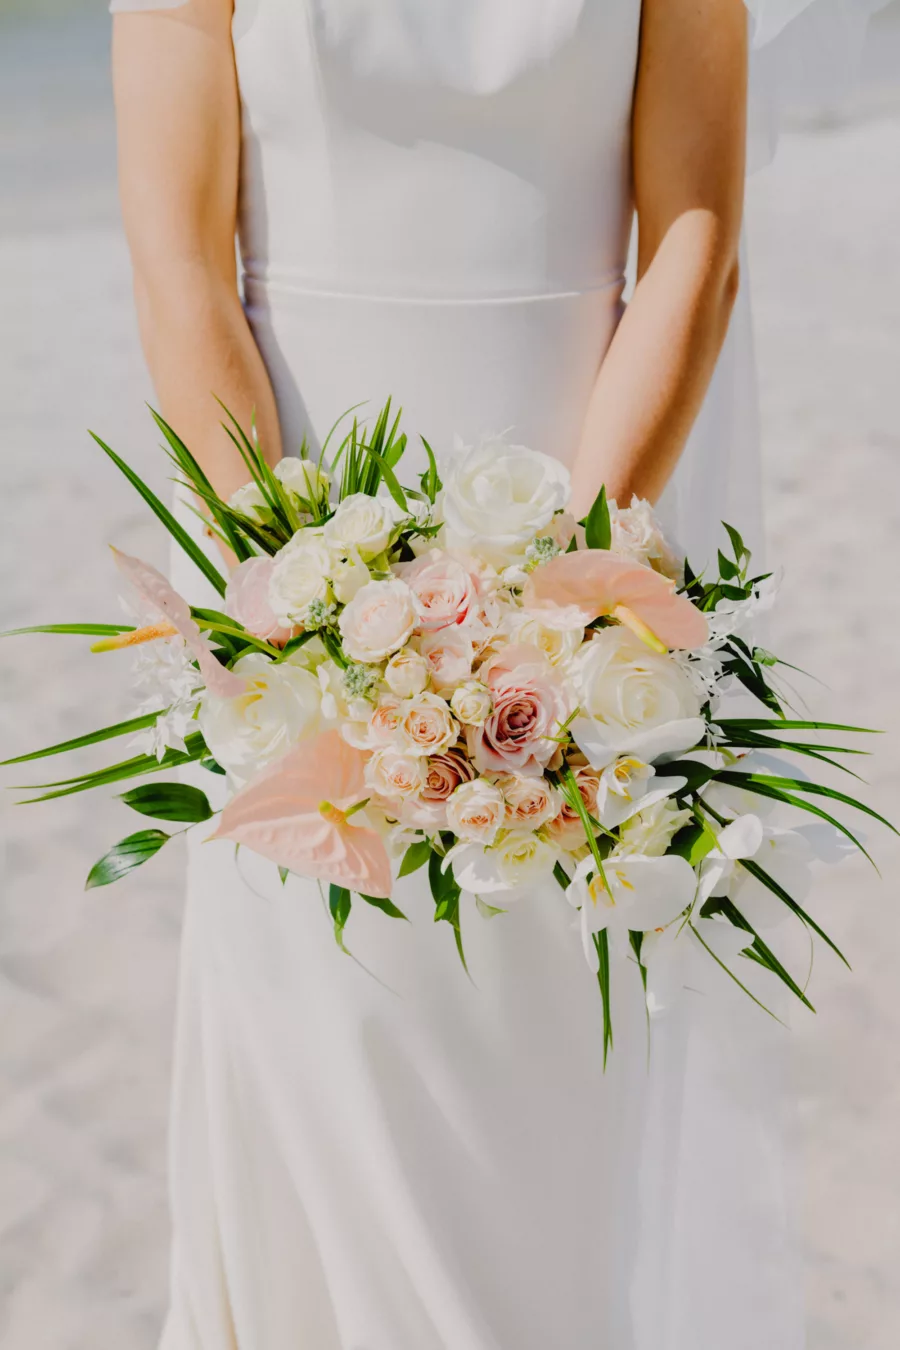 Pink and White Roses, Pink Anthurium, Orchids, and Greenery Tropical Spring Wedding Bouquet | St Pete Florist Monarch Events and Design